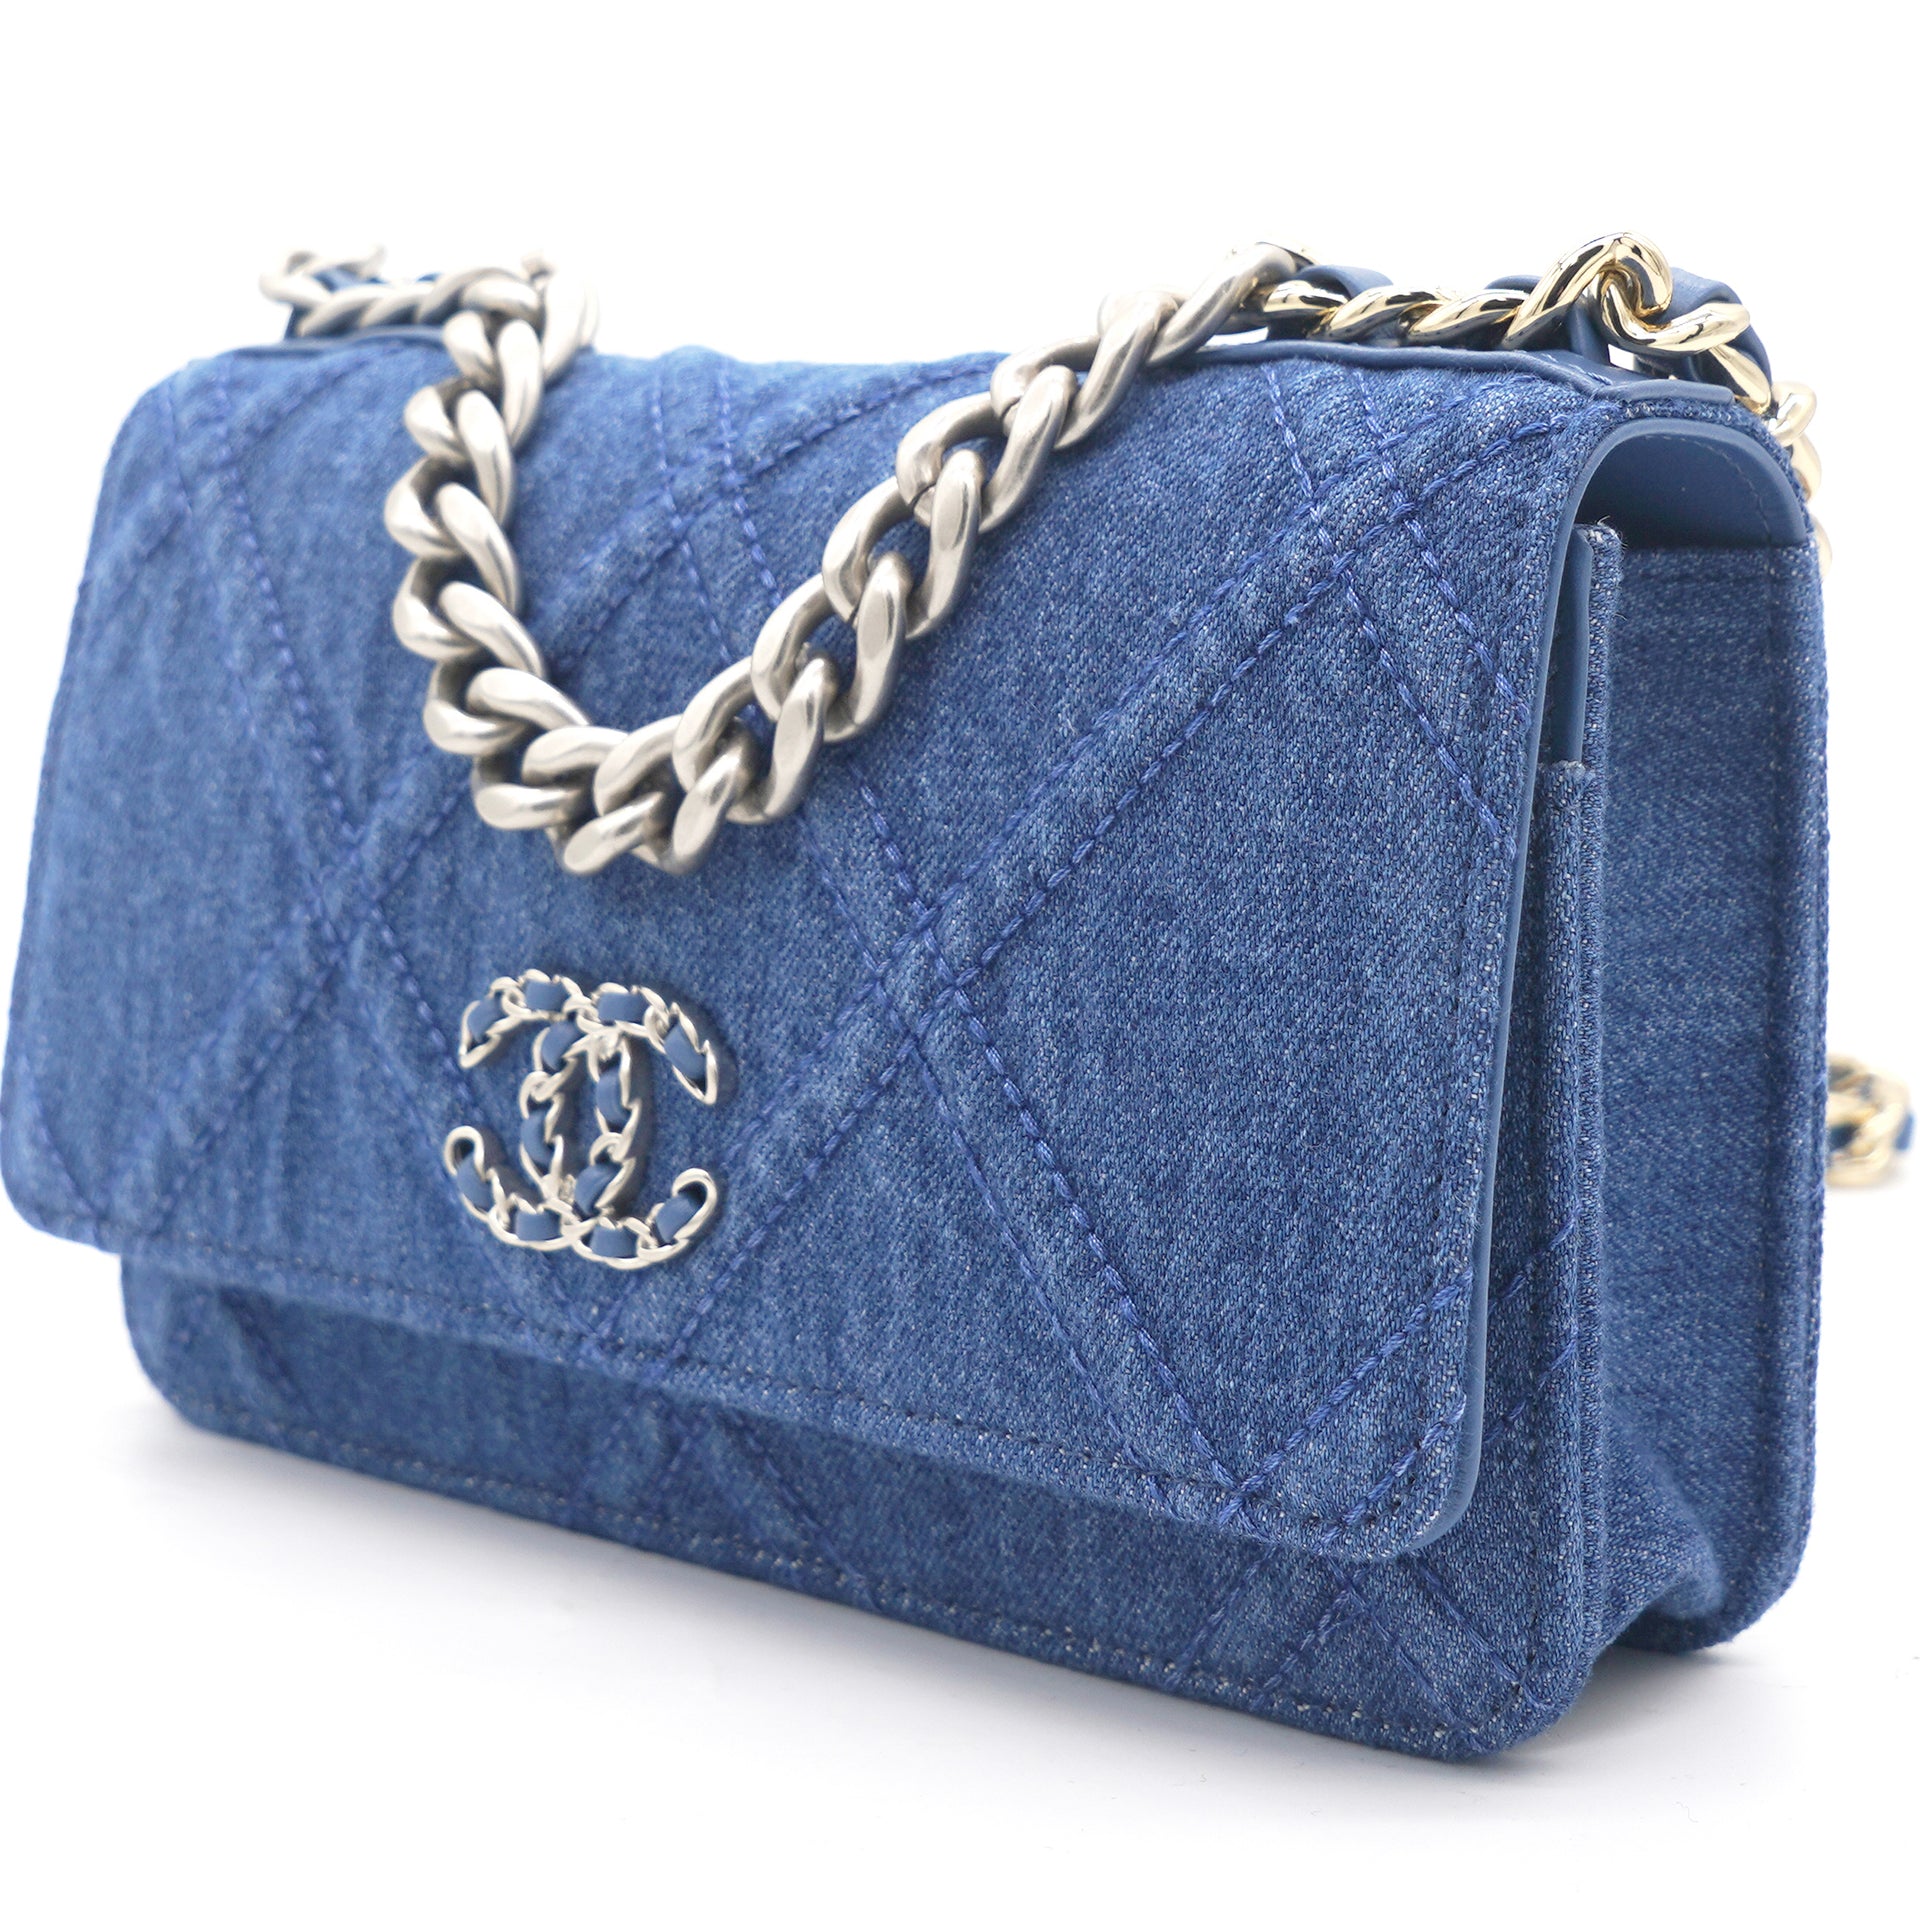 Replica Chanel 22P 19 Flap Bag Denim blue jean with Silver Hardware AS